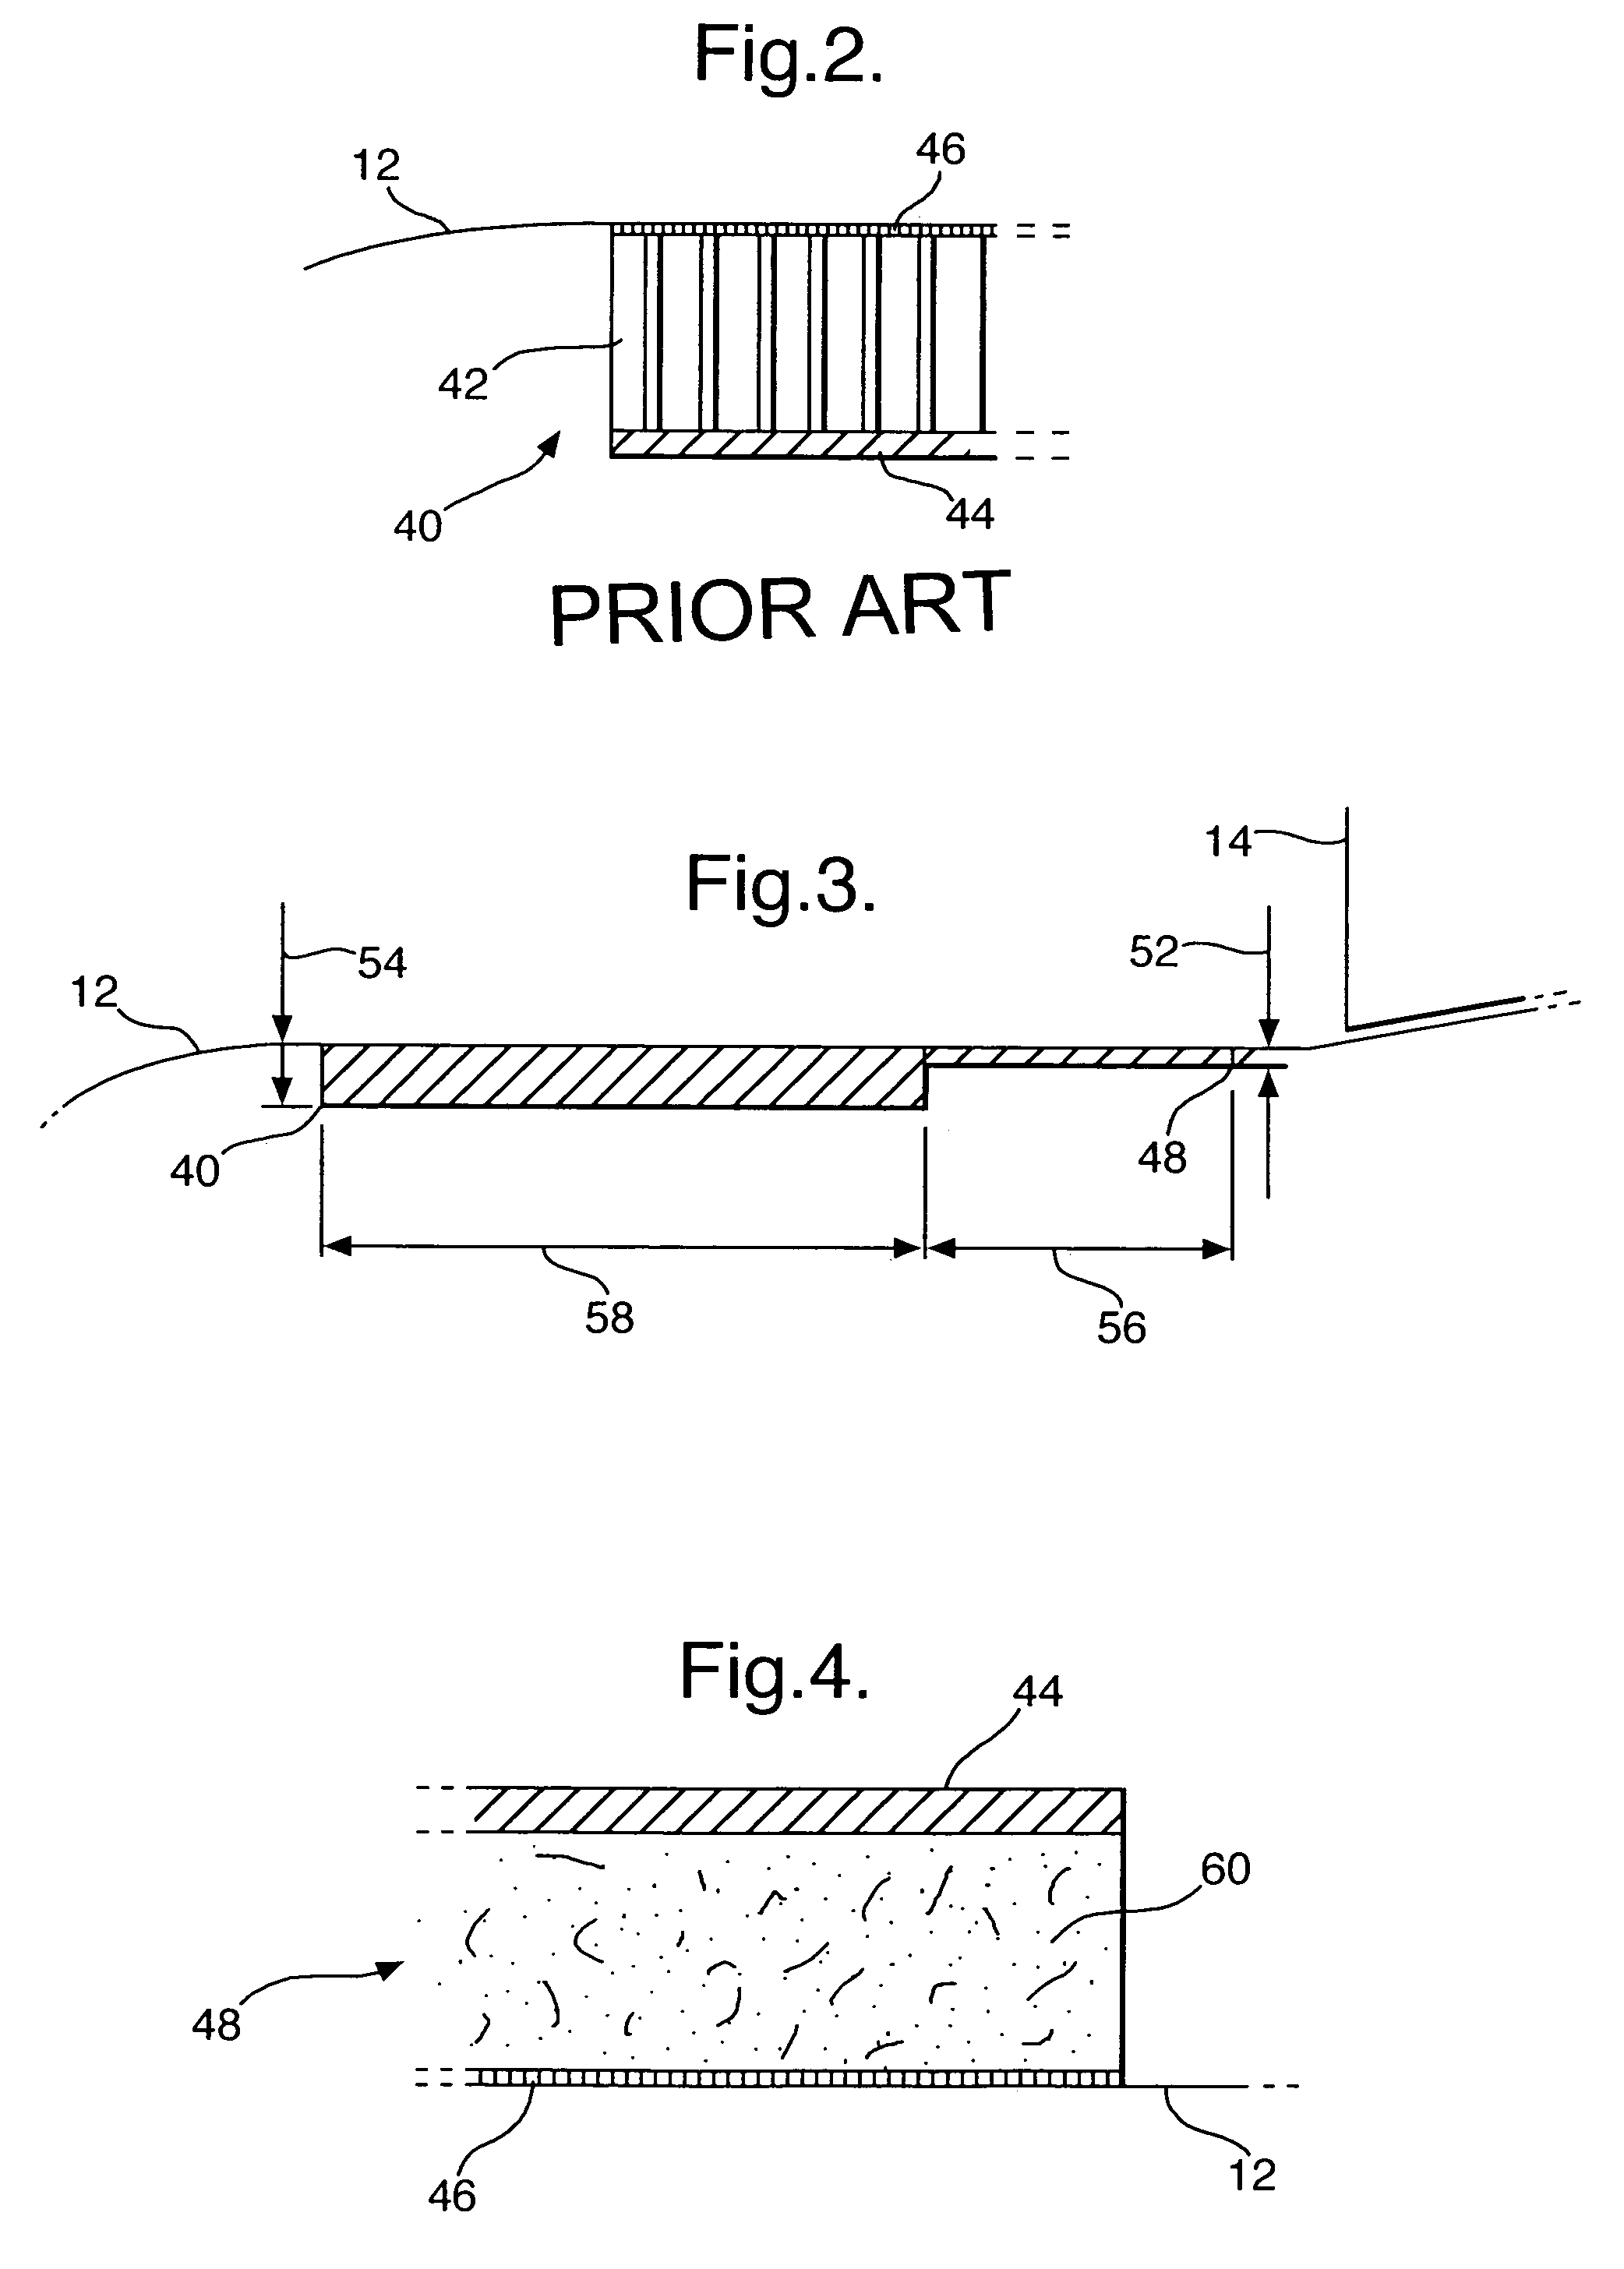 Acoustic liner for gas turbine engine